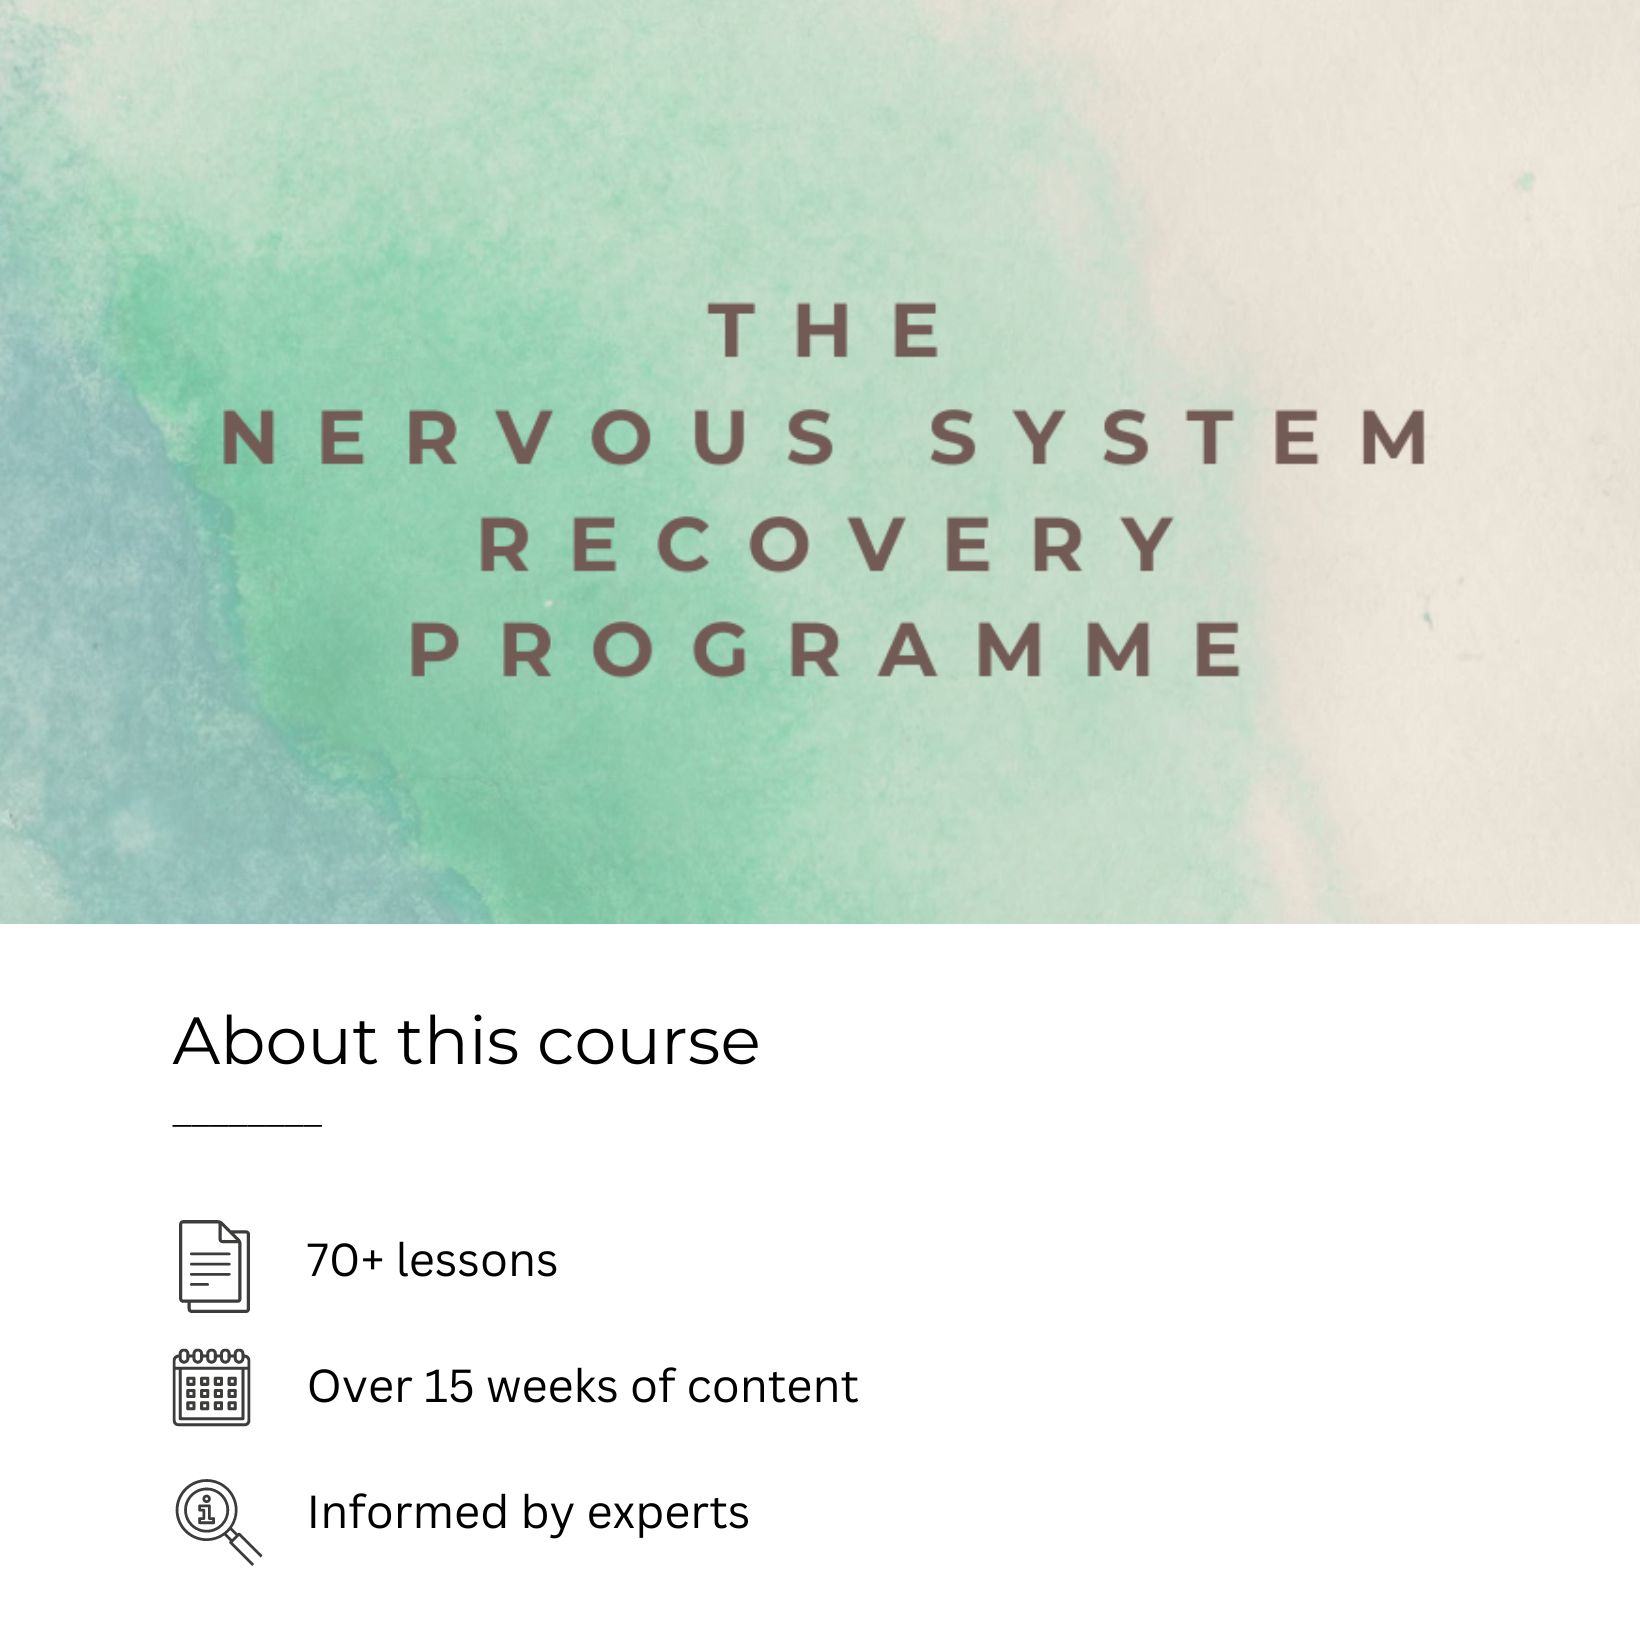 The Nervous System Recovery Programme